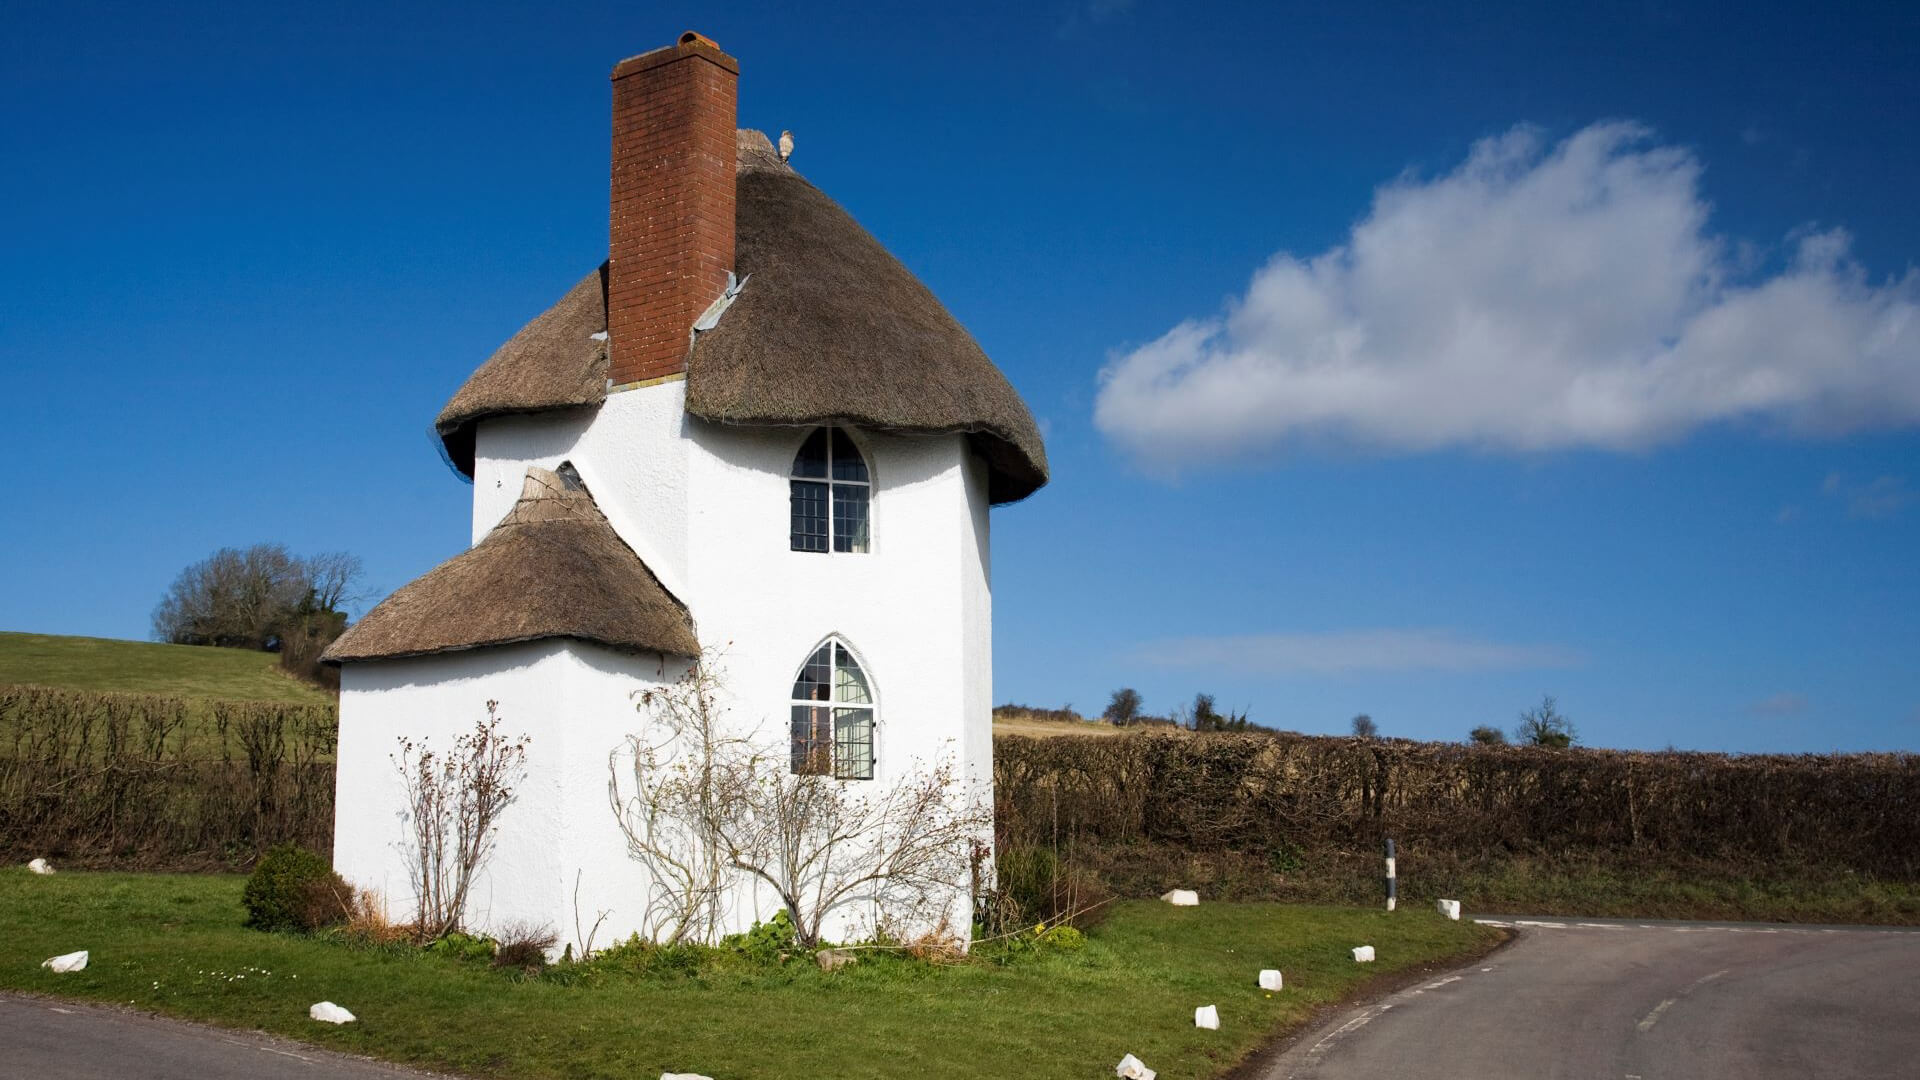 Cob Houses, Built With Ancient Techniques, May Be The Newest Trend